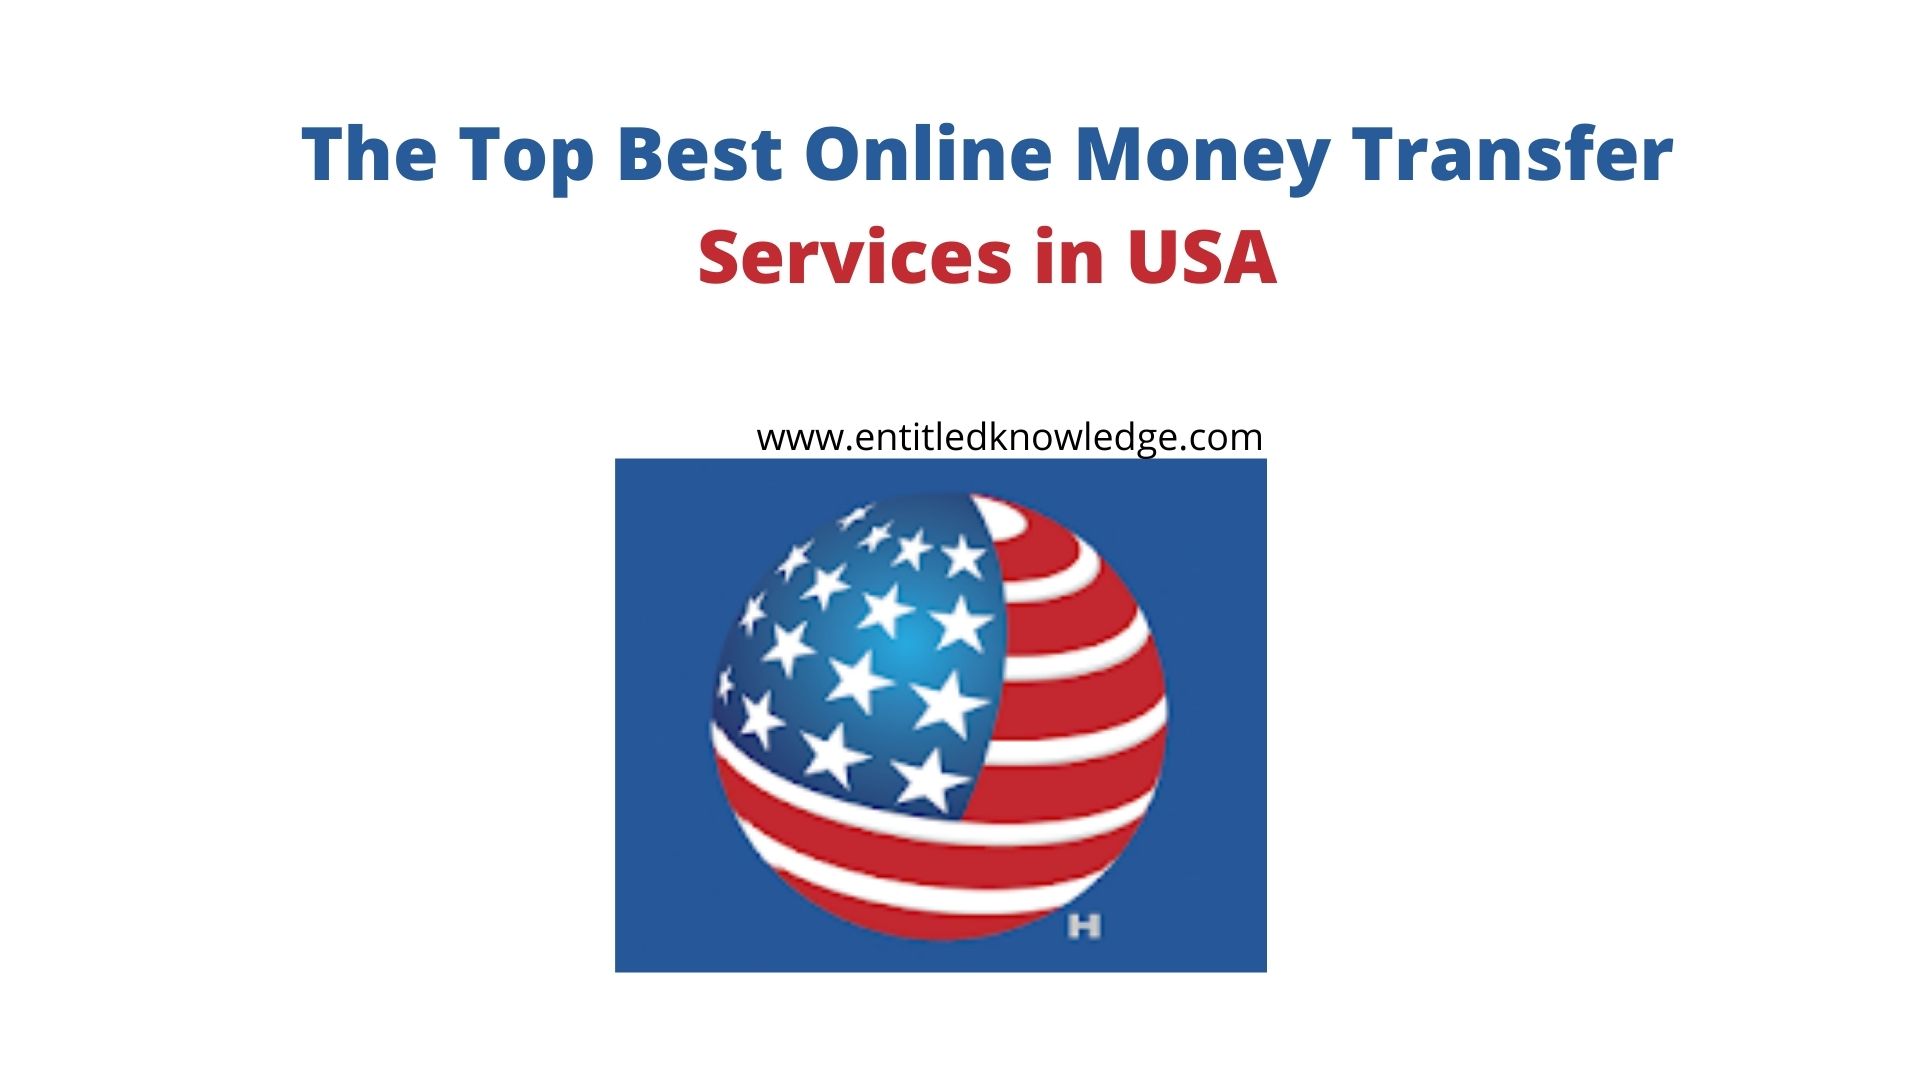 The Top Best Online Money Transfer Services in USA